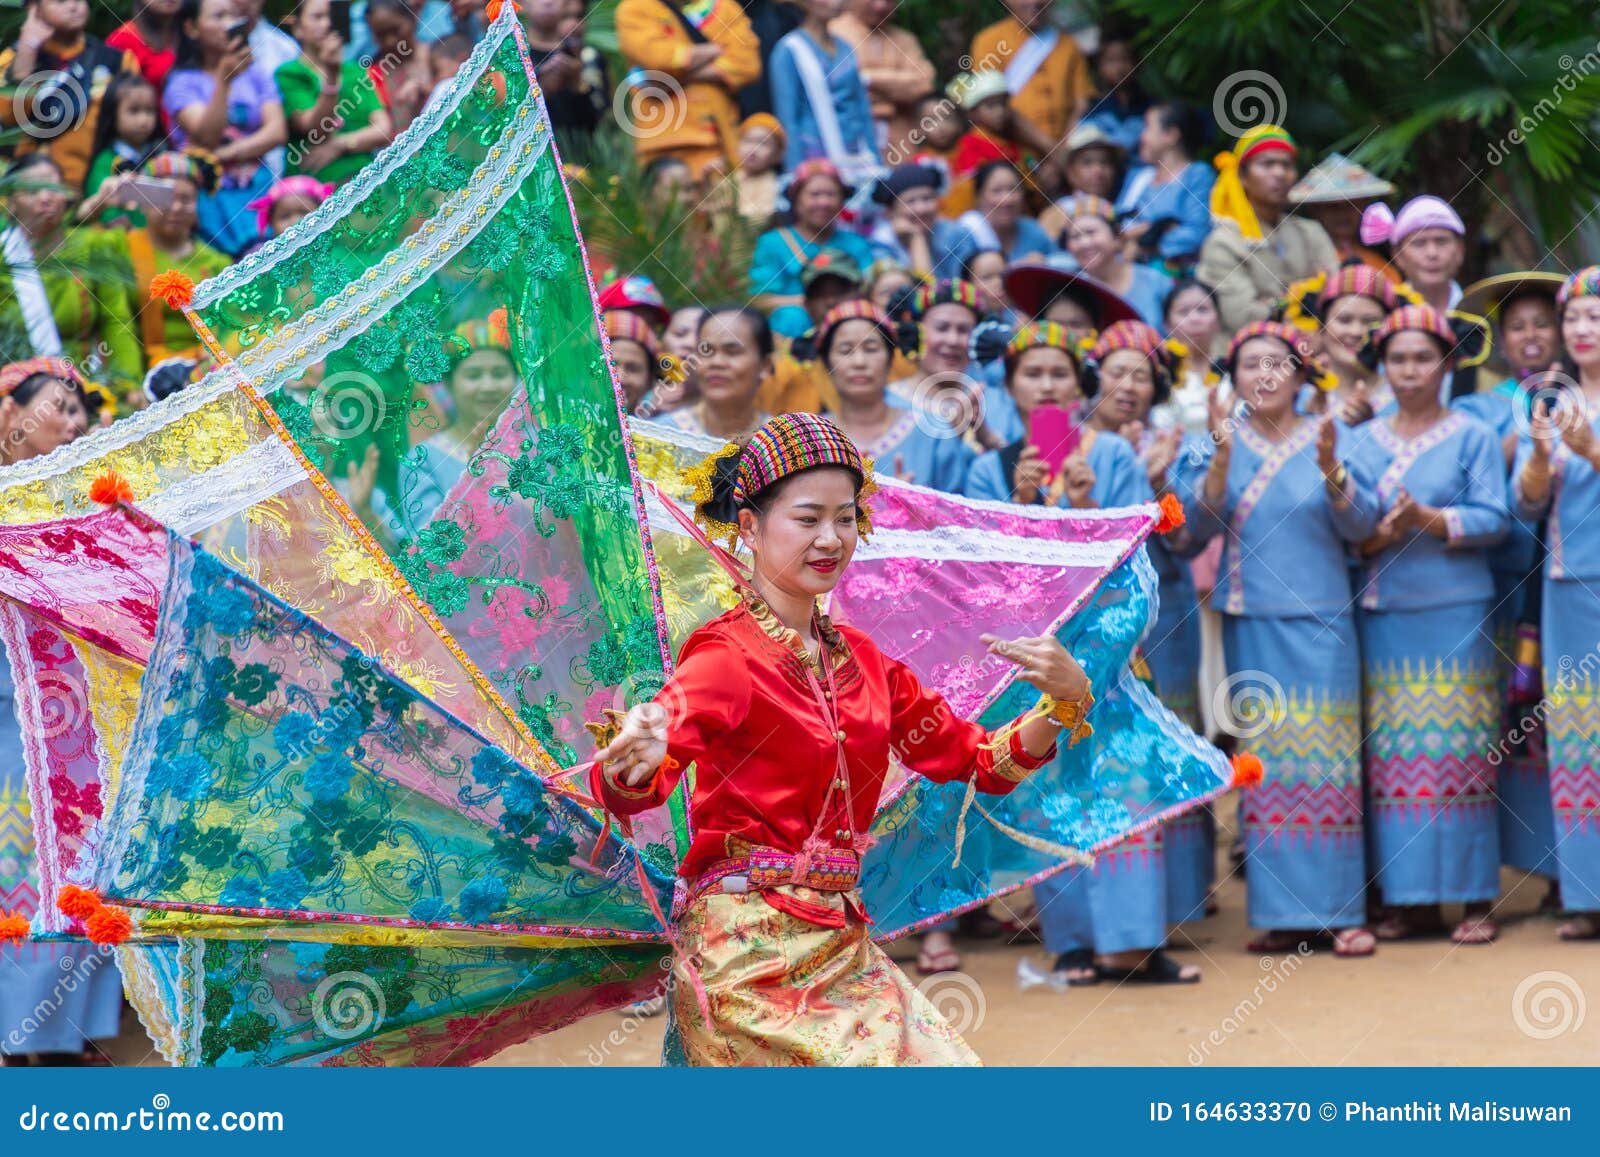 Group Of Shan Or Tai Yai Ethnic Group Living In Parts Of Myanmar And ... Traditional Thai Dancing